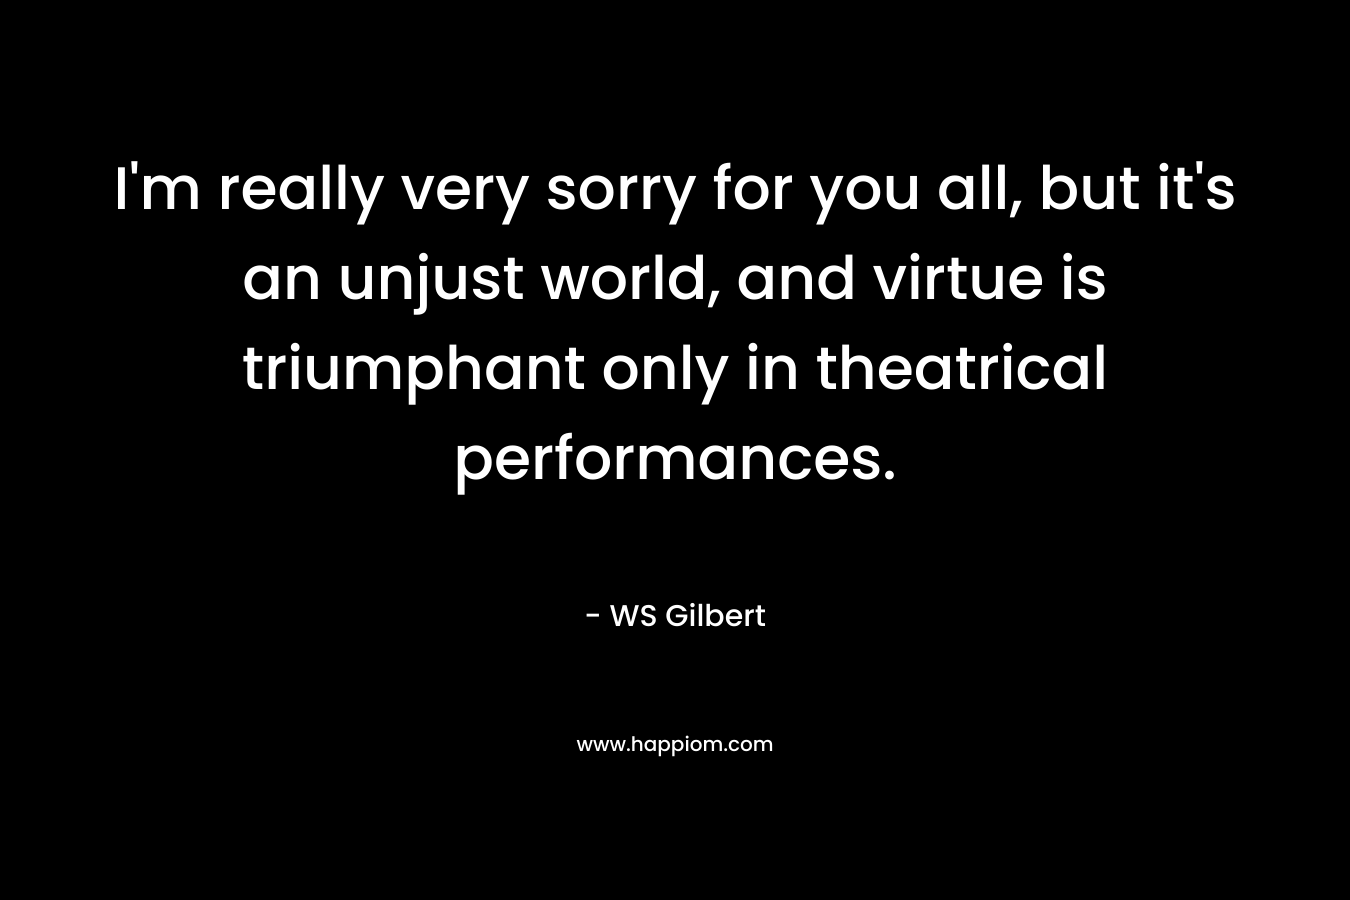 I’m really very sorry for you all, but it’s an unjust world, and virtue is triumphant only in theatrical performances. – WS Gilbert